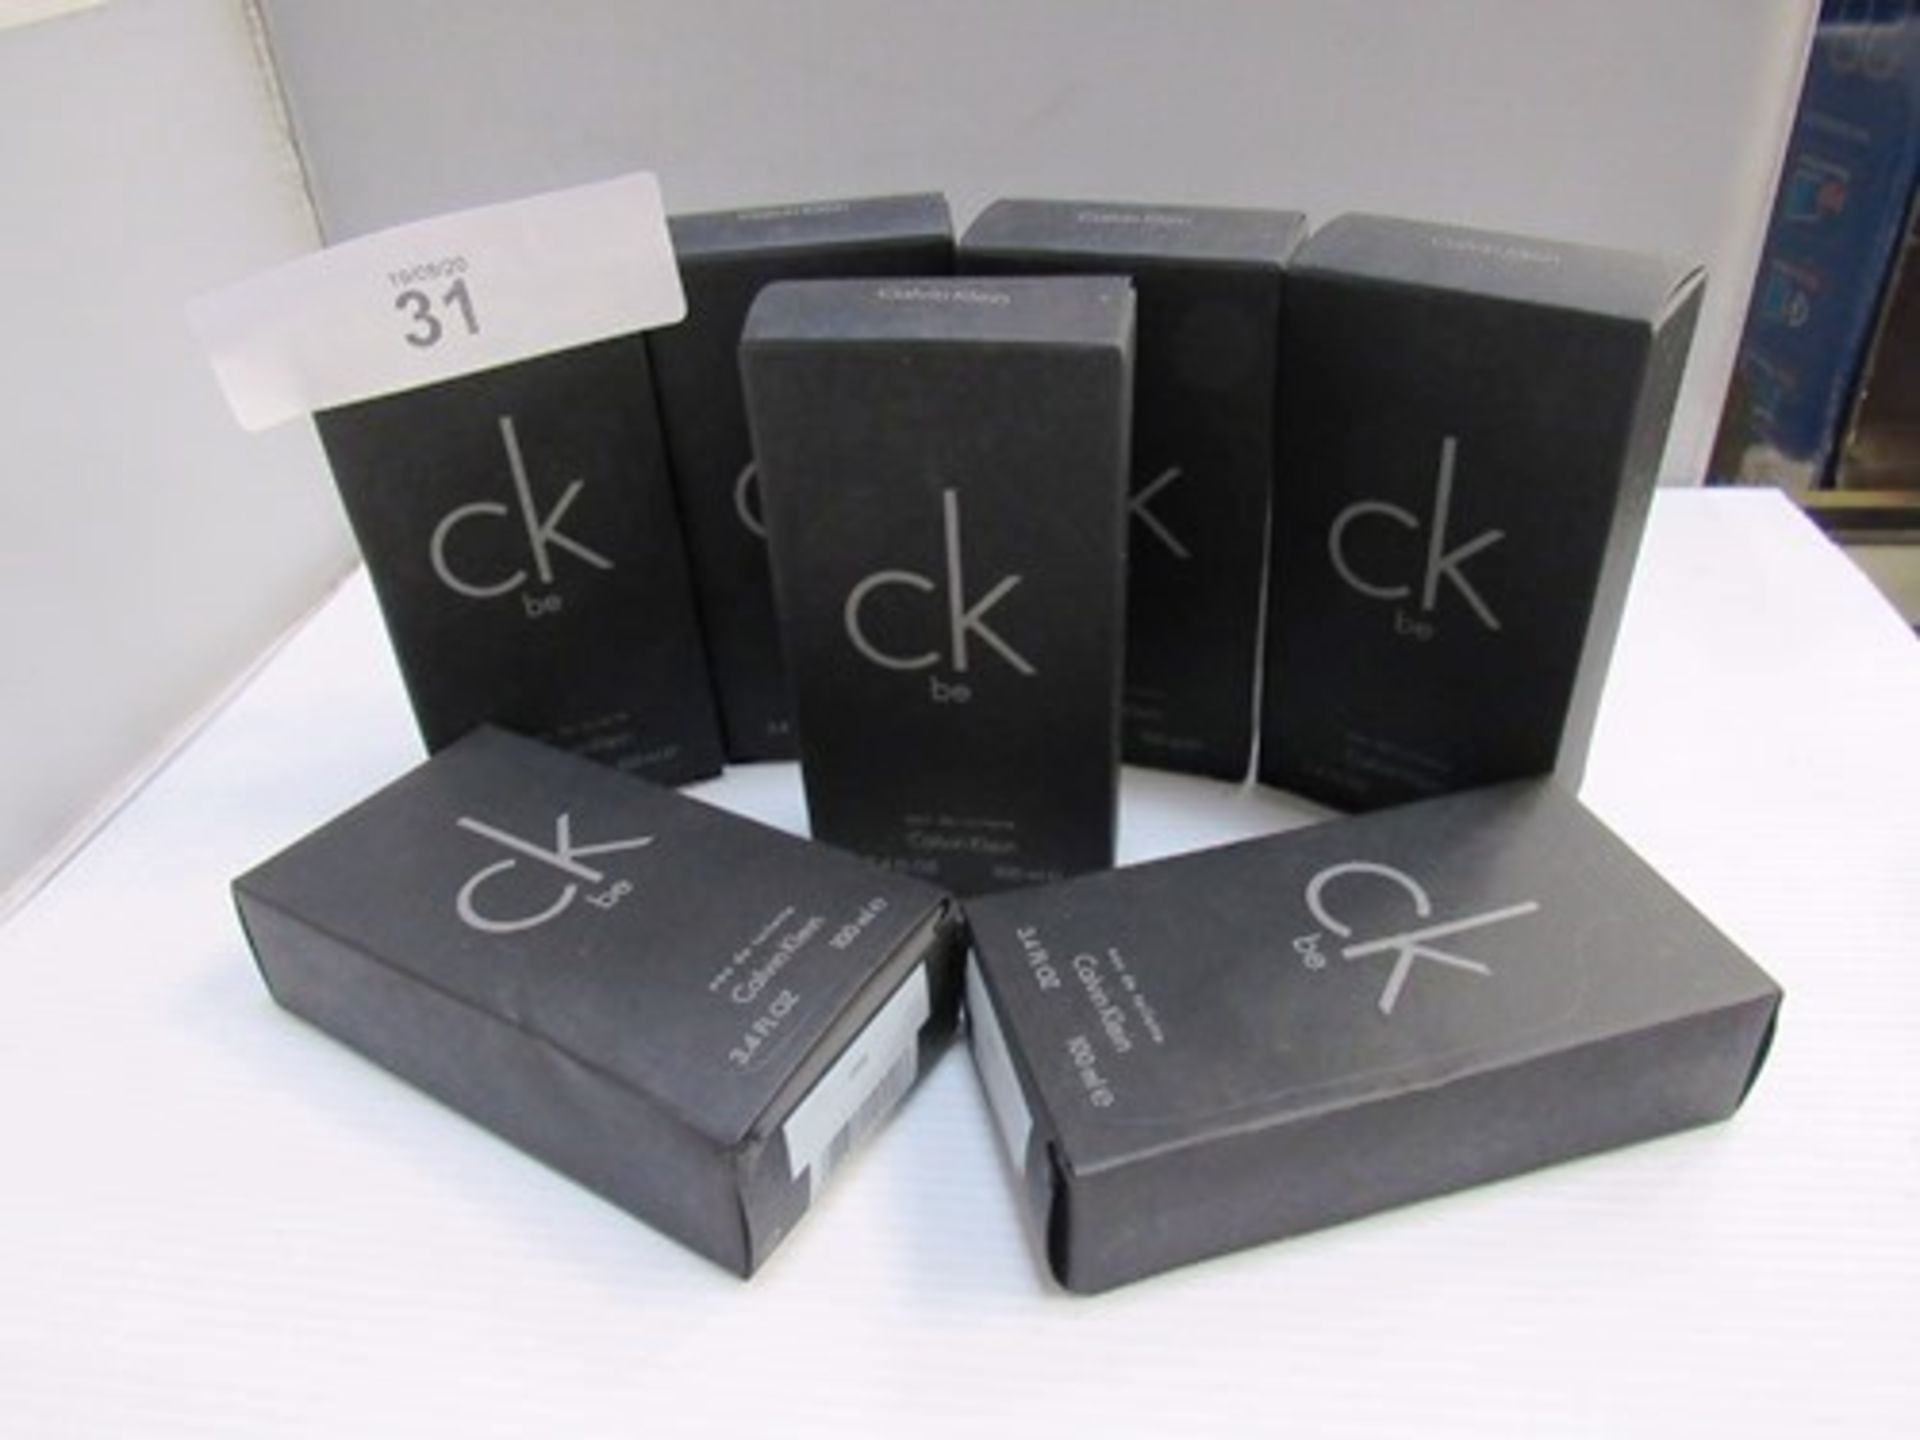 7 x 100ml EDT's of Calvin Klein BE - New (FC8)